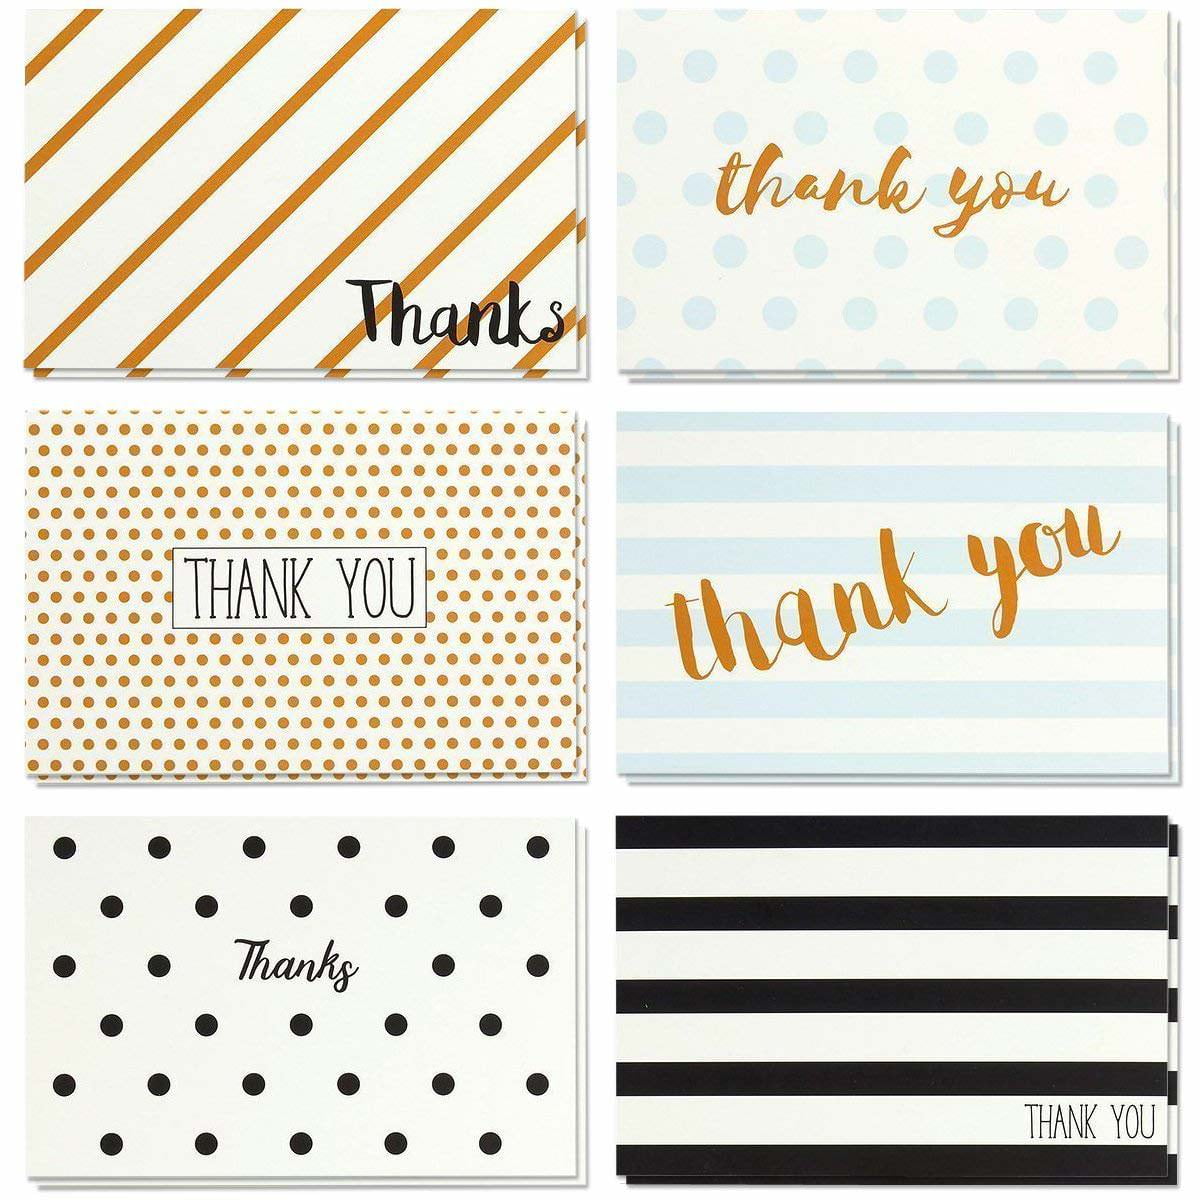 Thank You Cards - 48-Count Thank You Notes, Bulk Thank You Cards Set - Blank on the Inside